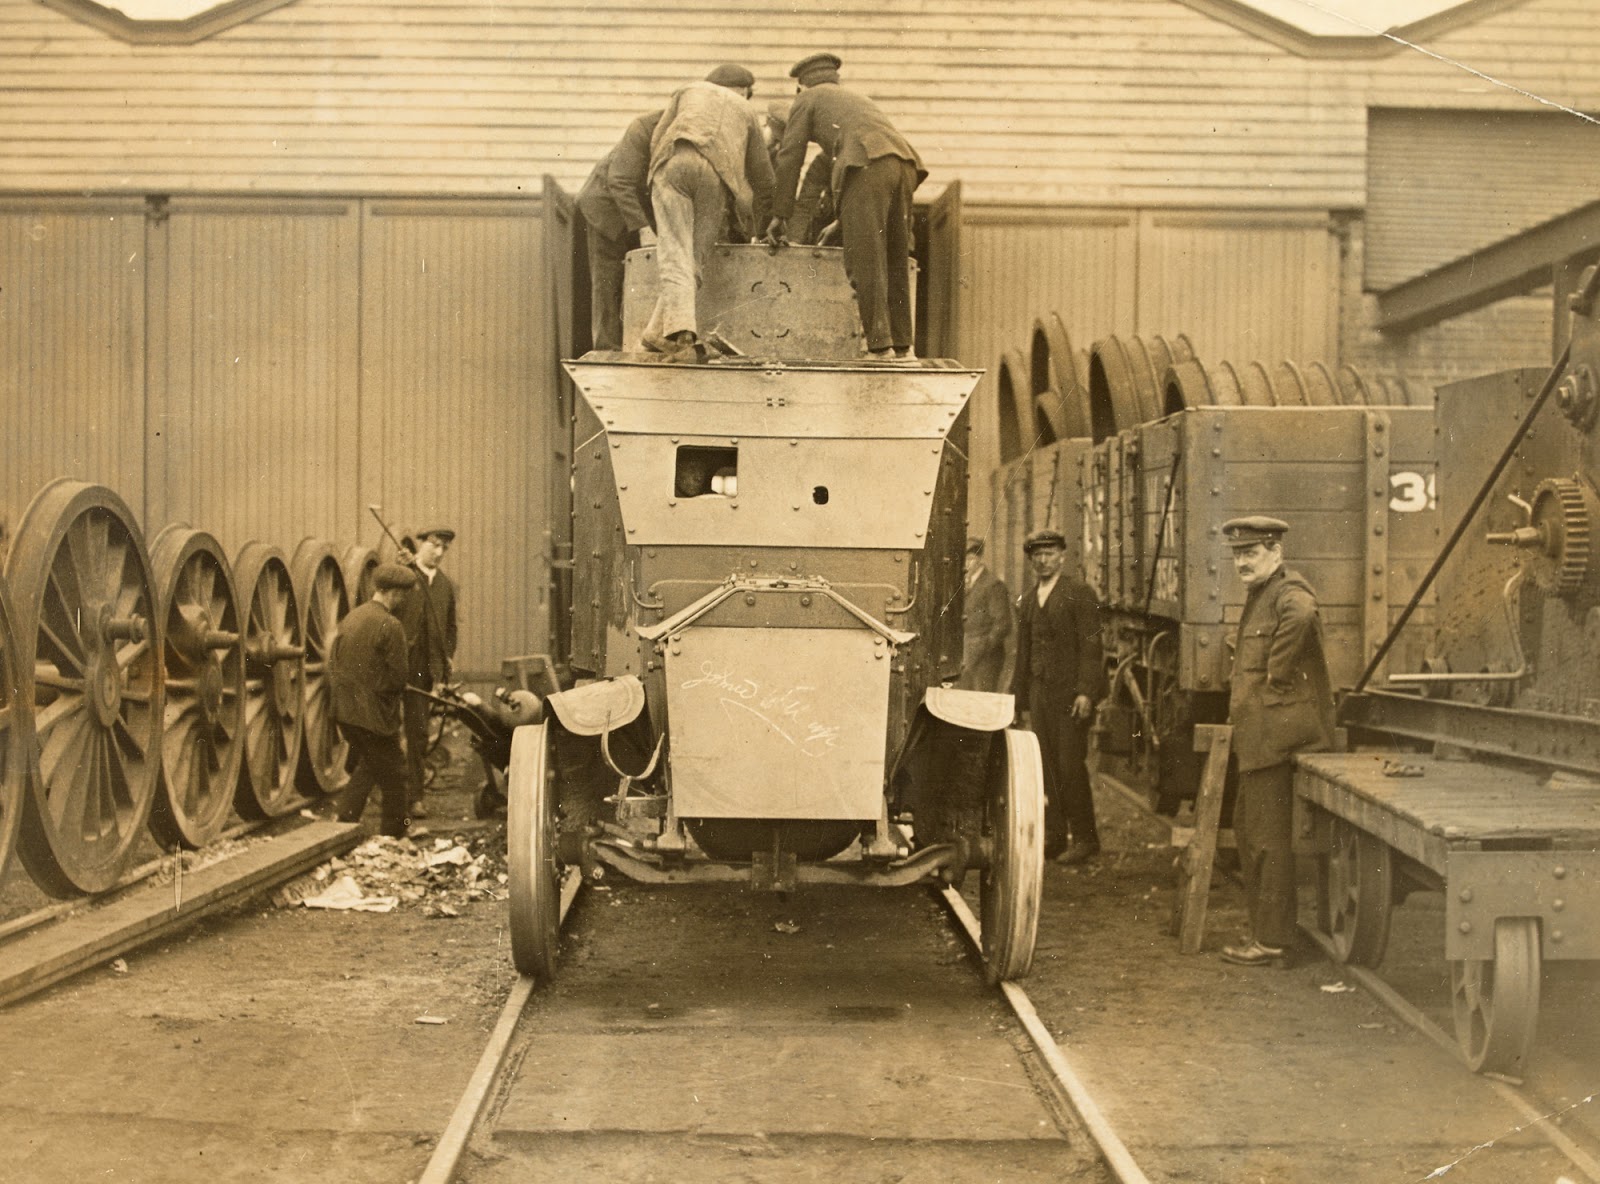 A British armored vehicle being made in 1919.